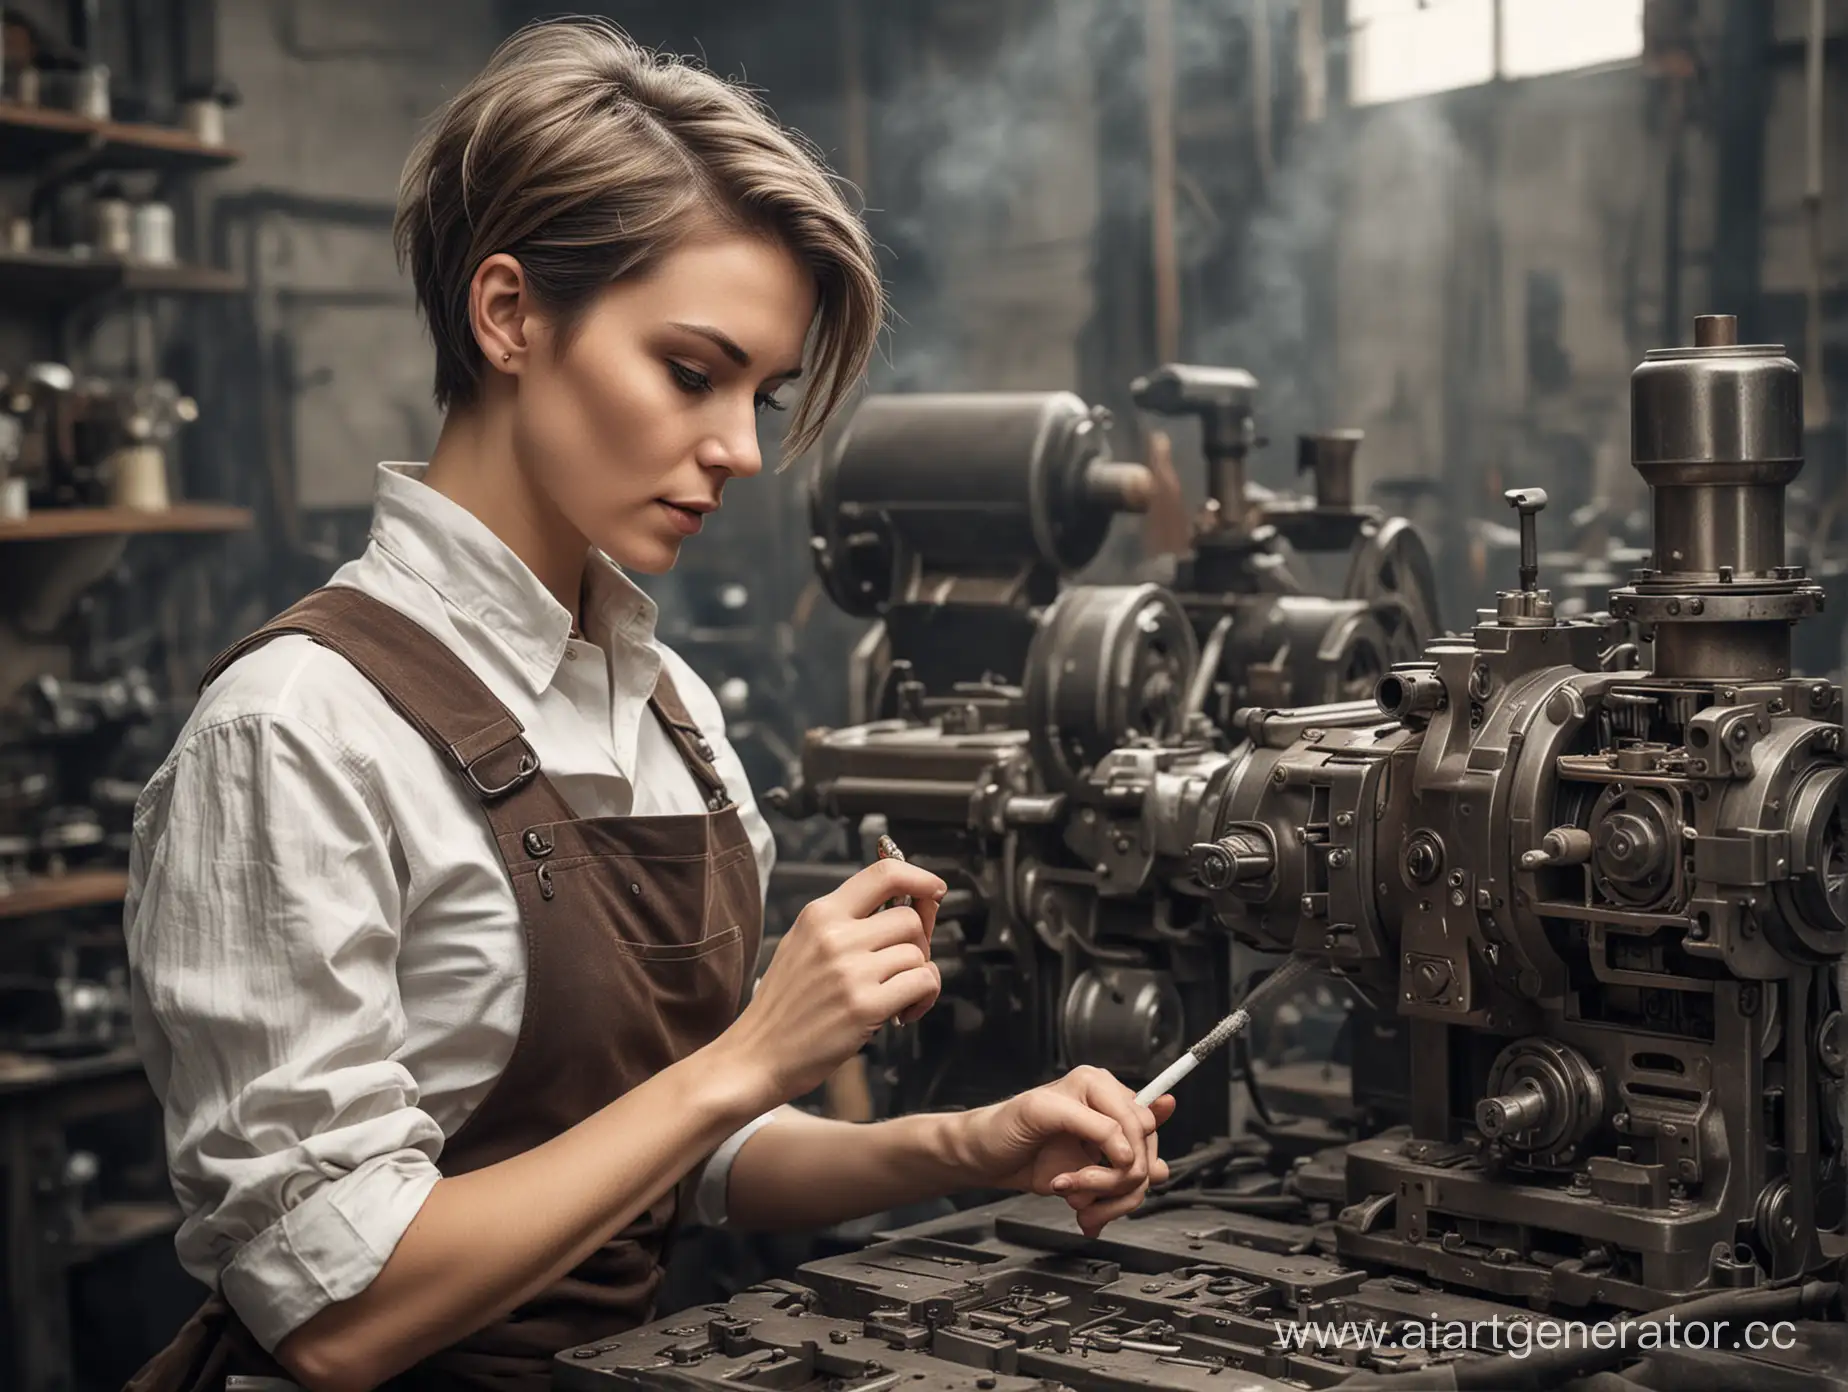 Steampunk-Factory-Worker-with-Cigarette-and-Milling-Machine